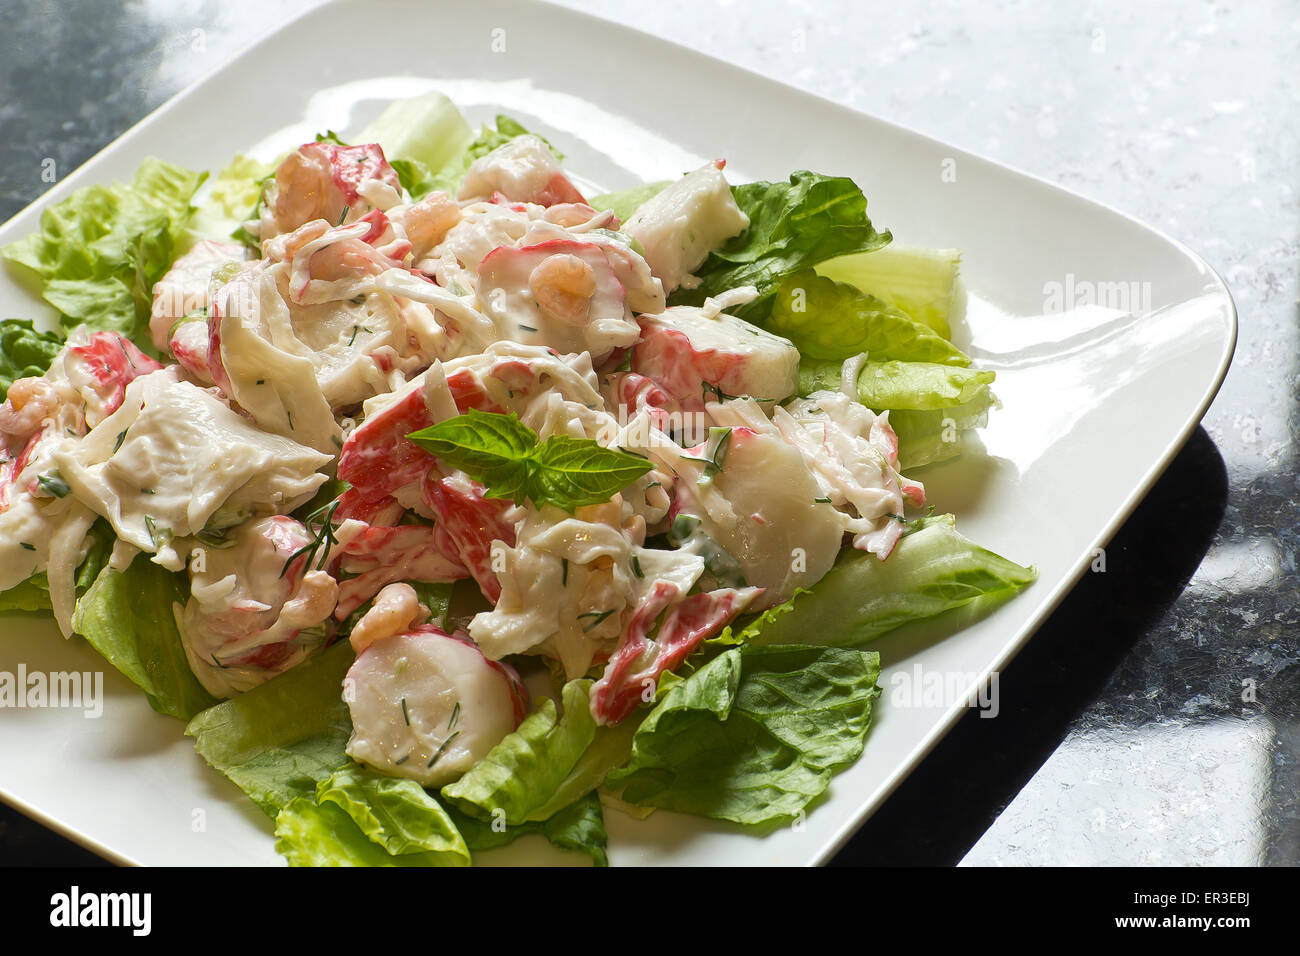 Mayonnaise seafood salad with shrimp and crab meat and fresh dill, romaine lettuce, and basil leaf garnish Stock Photo